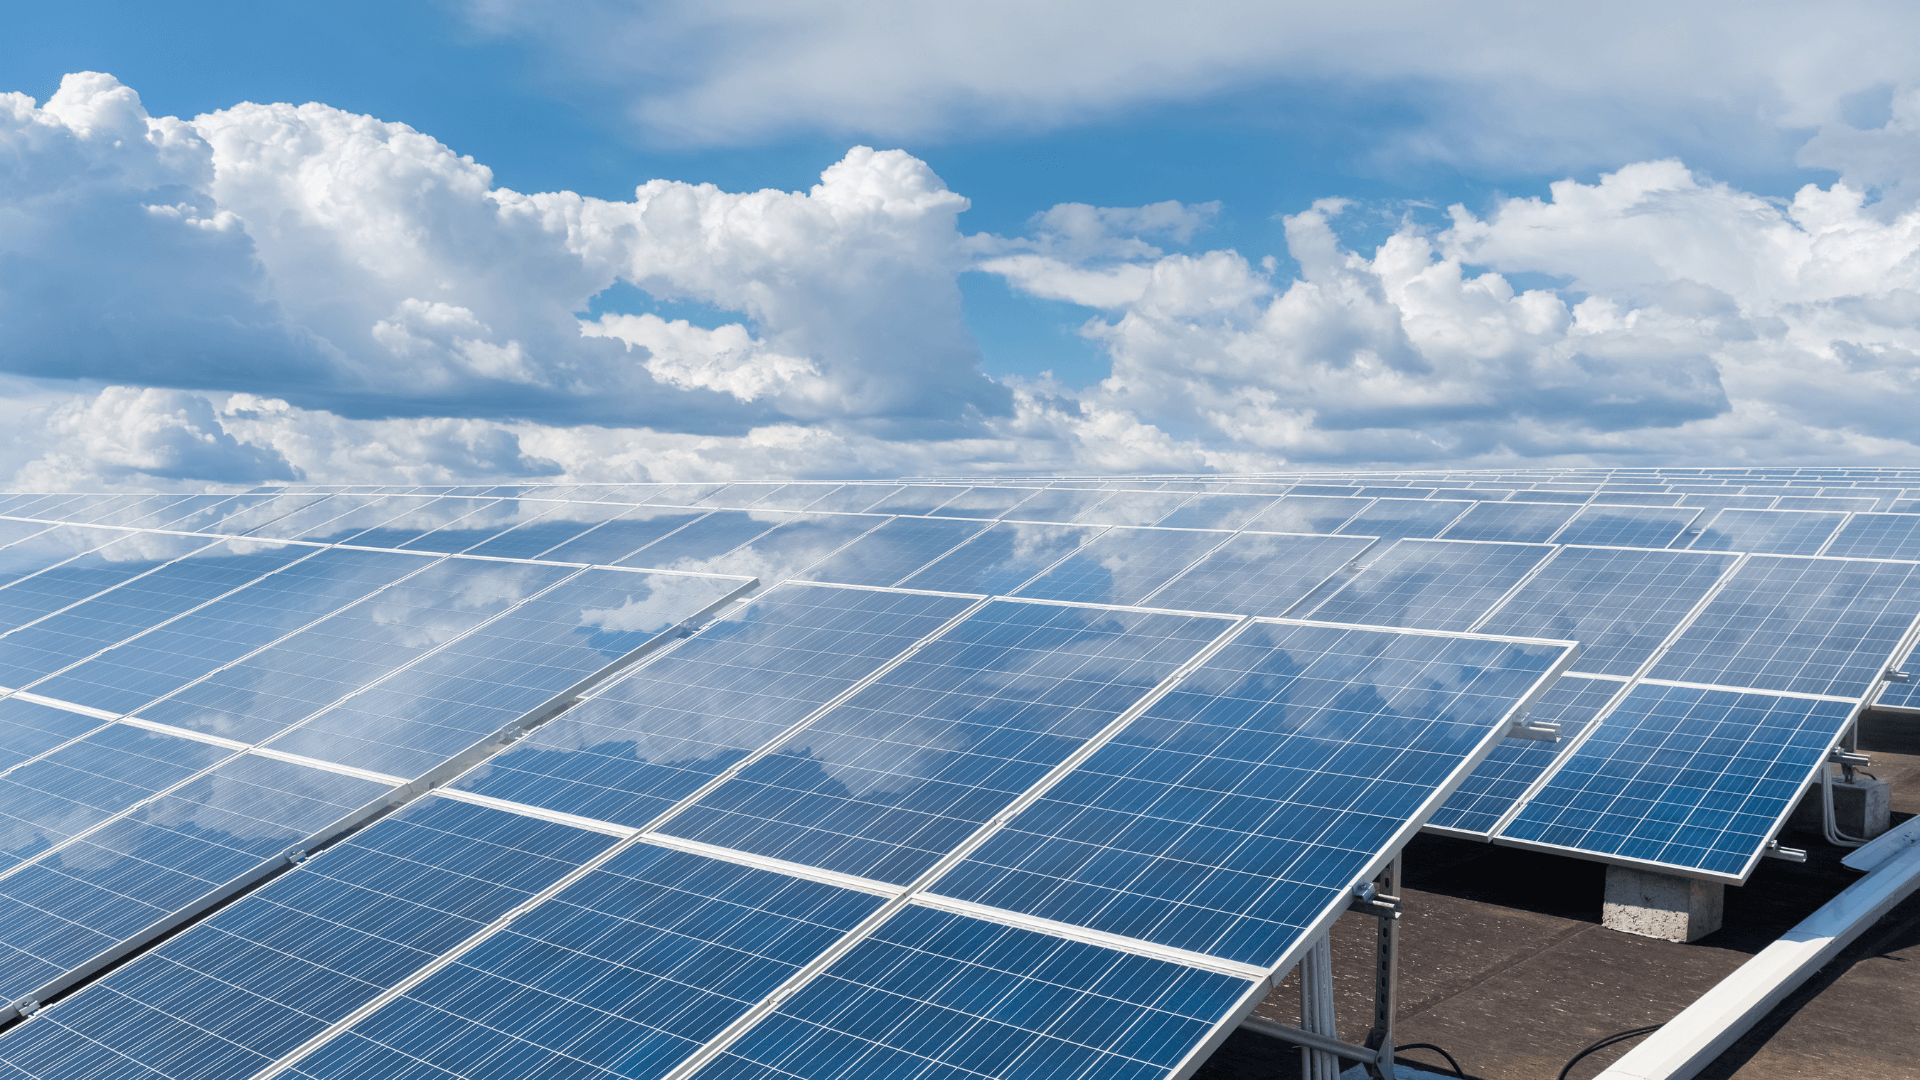 a field of solar panels below a blue sky with white clouds